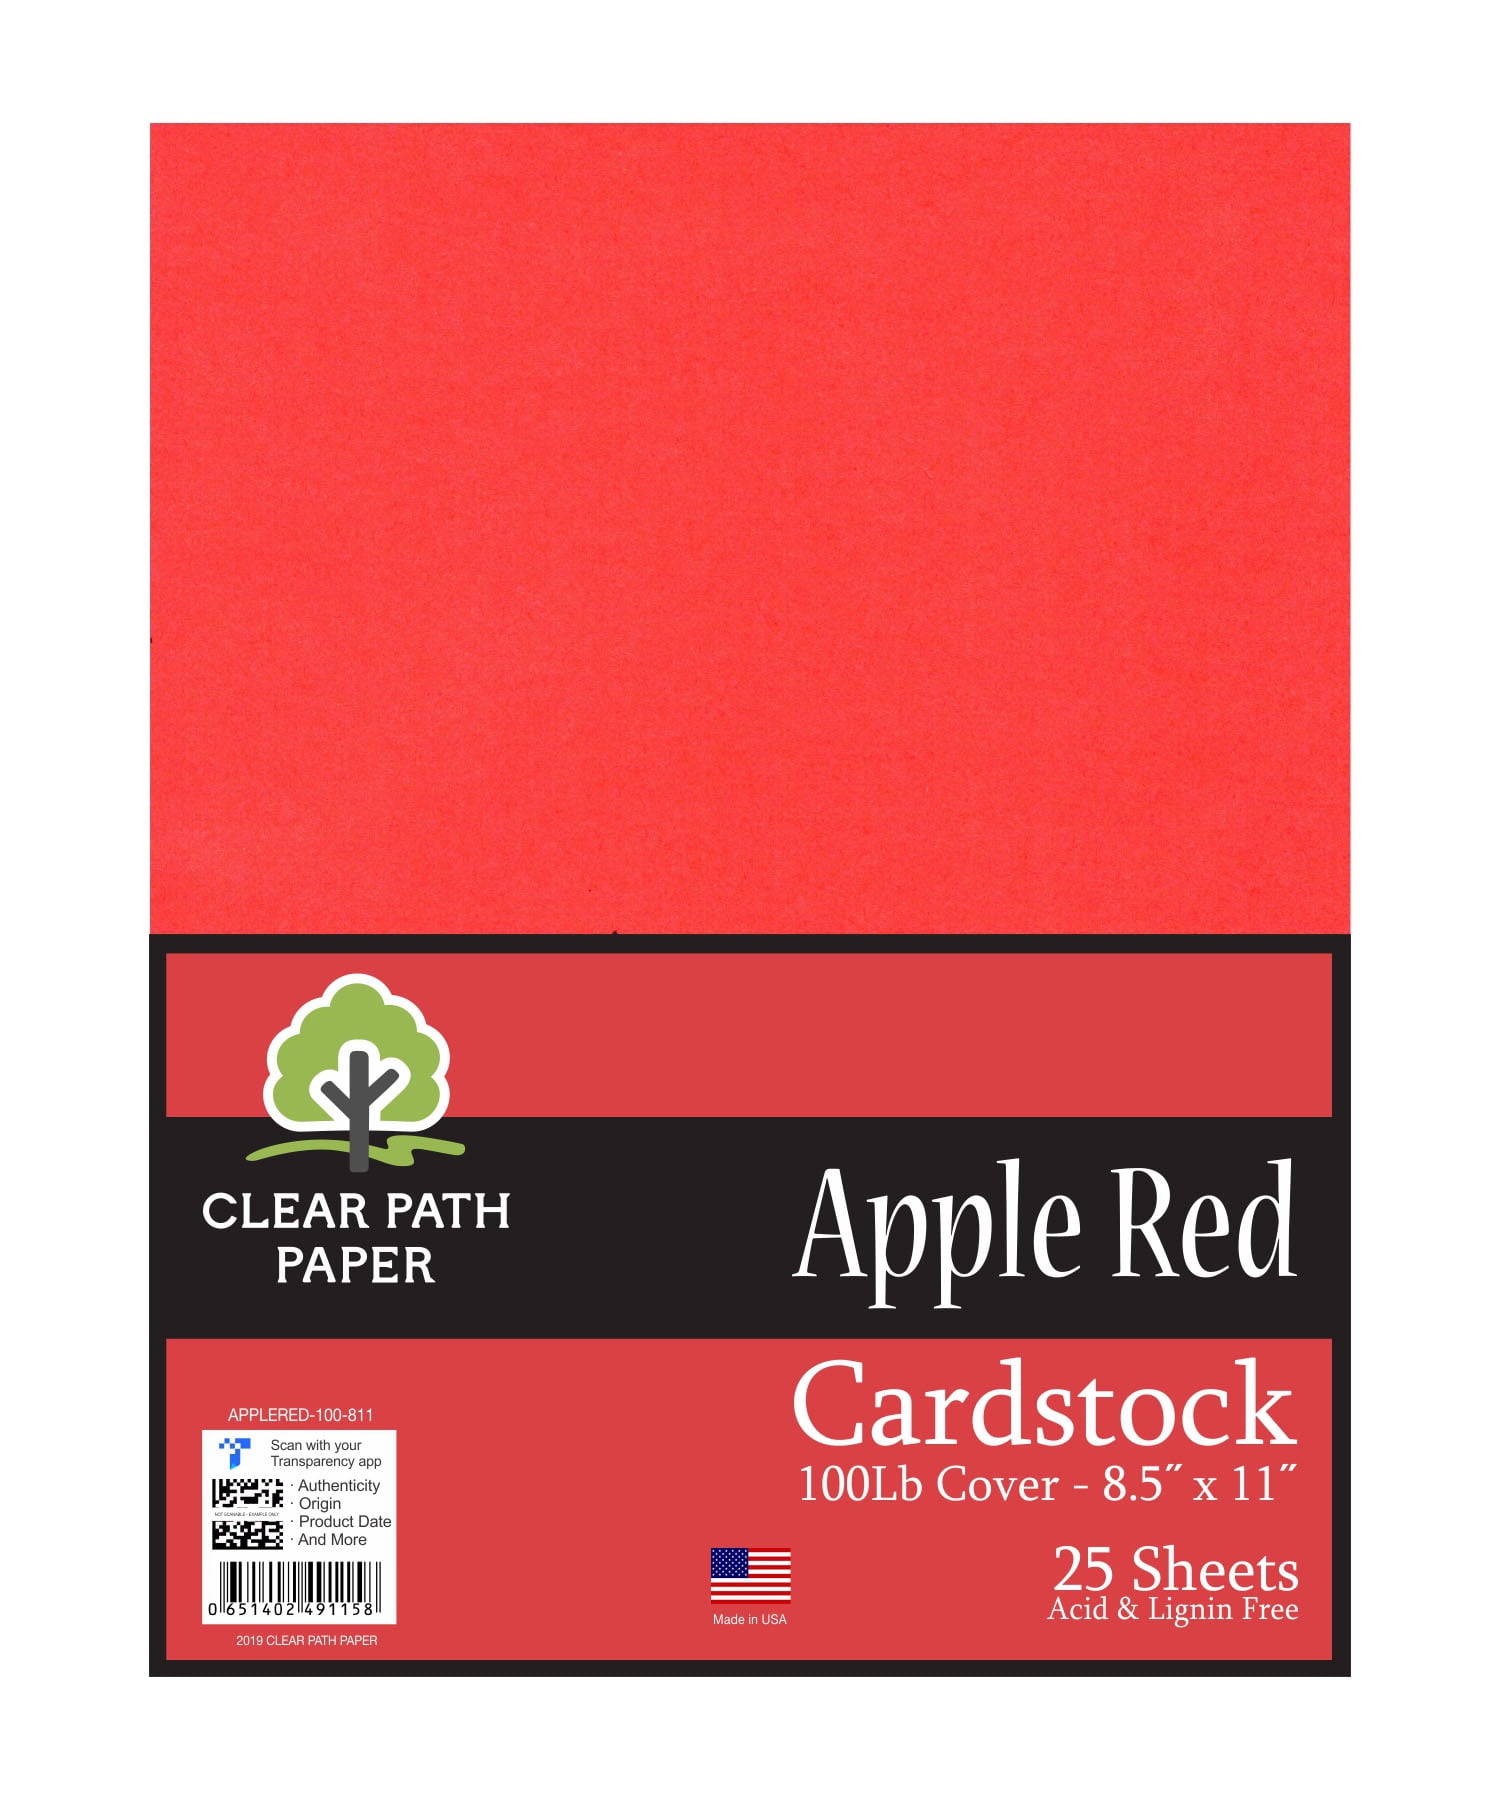 8.5 x 11 inch Formerly Red Hot 65Lb Cover 100 Sheets Clear Path Paper Apple Red Cardstock